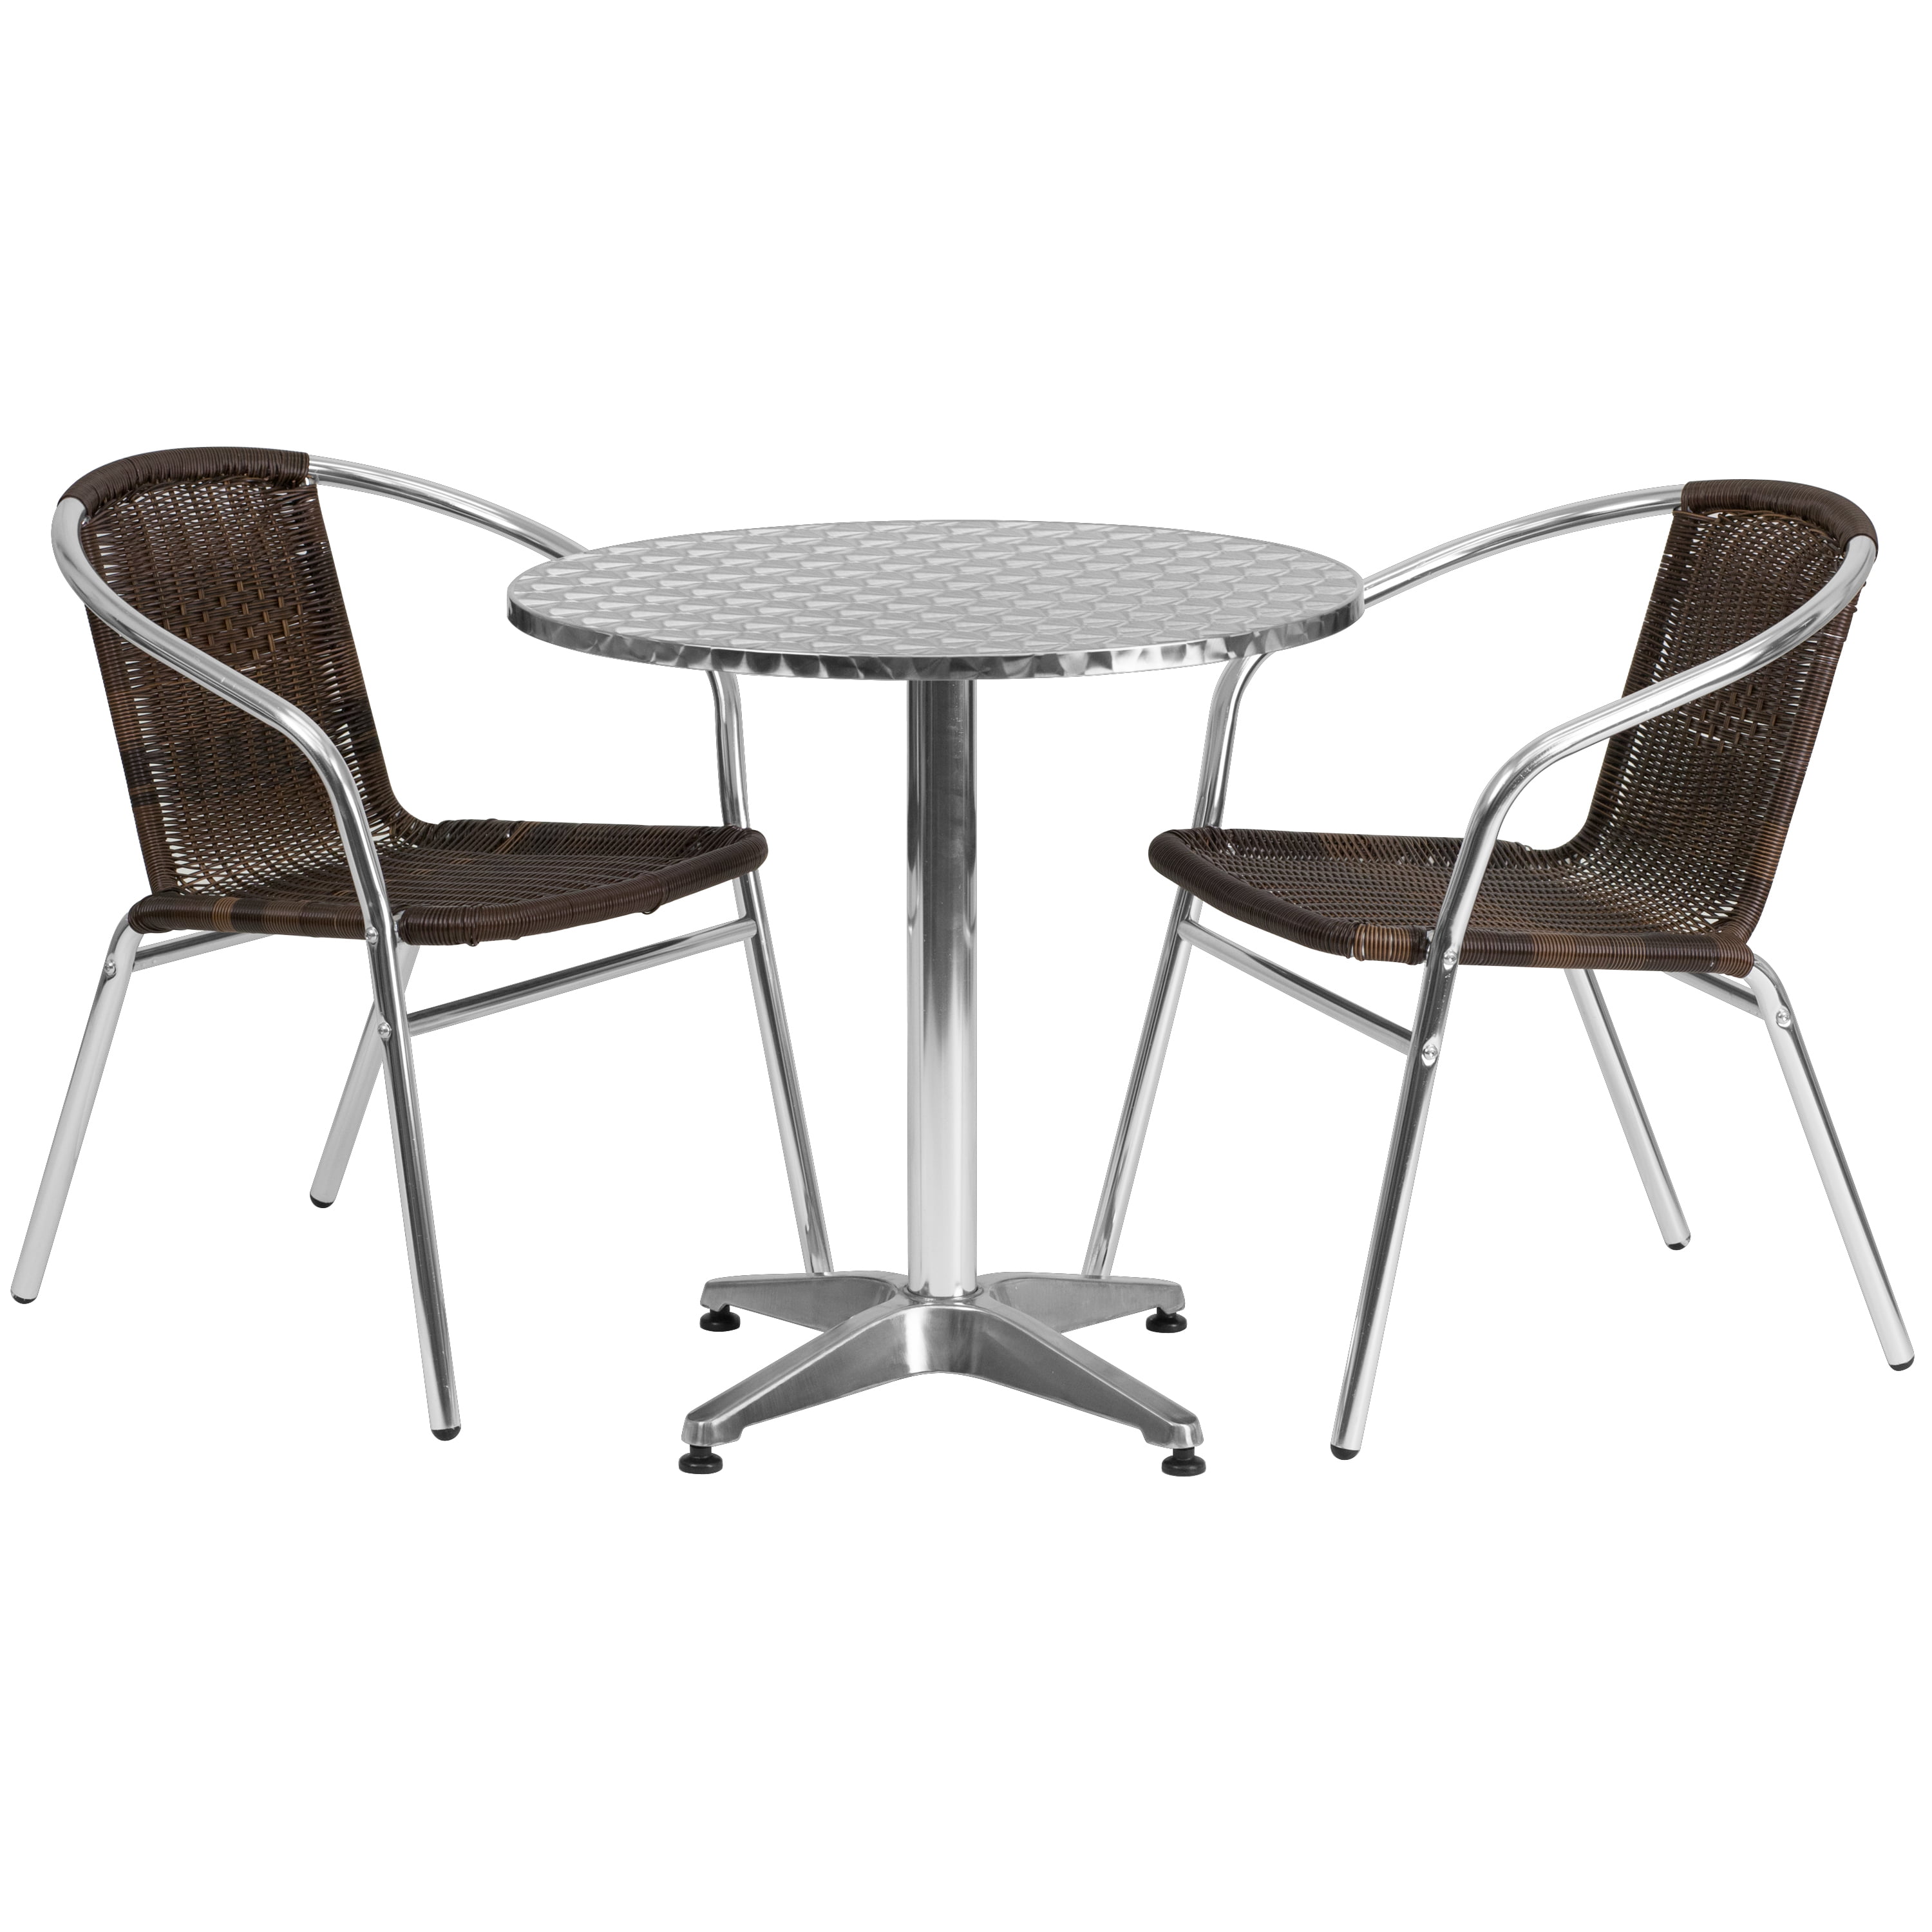 Flash Furniture 27.5'' Round Aluminum Indoor-Outdoor Table Set with 2 Dark Brown Rattan Chairs - image 2 of 5